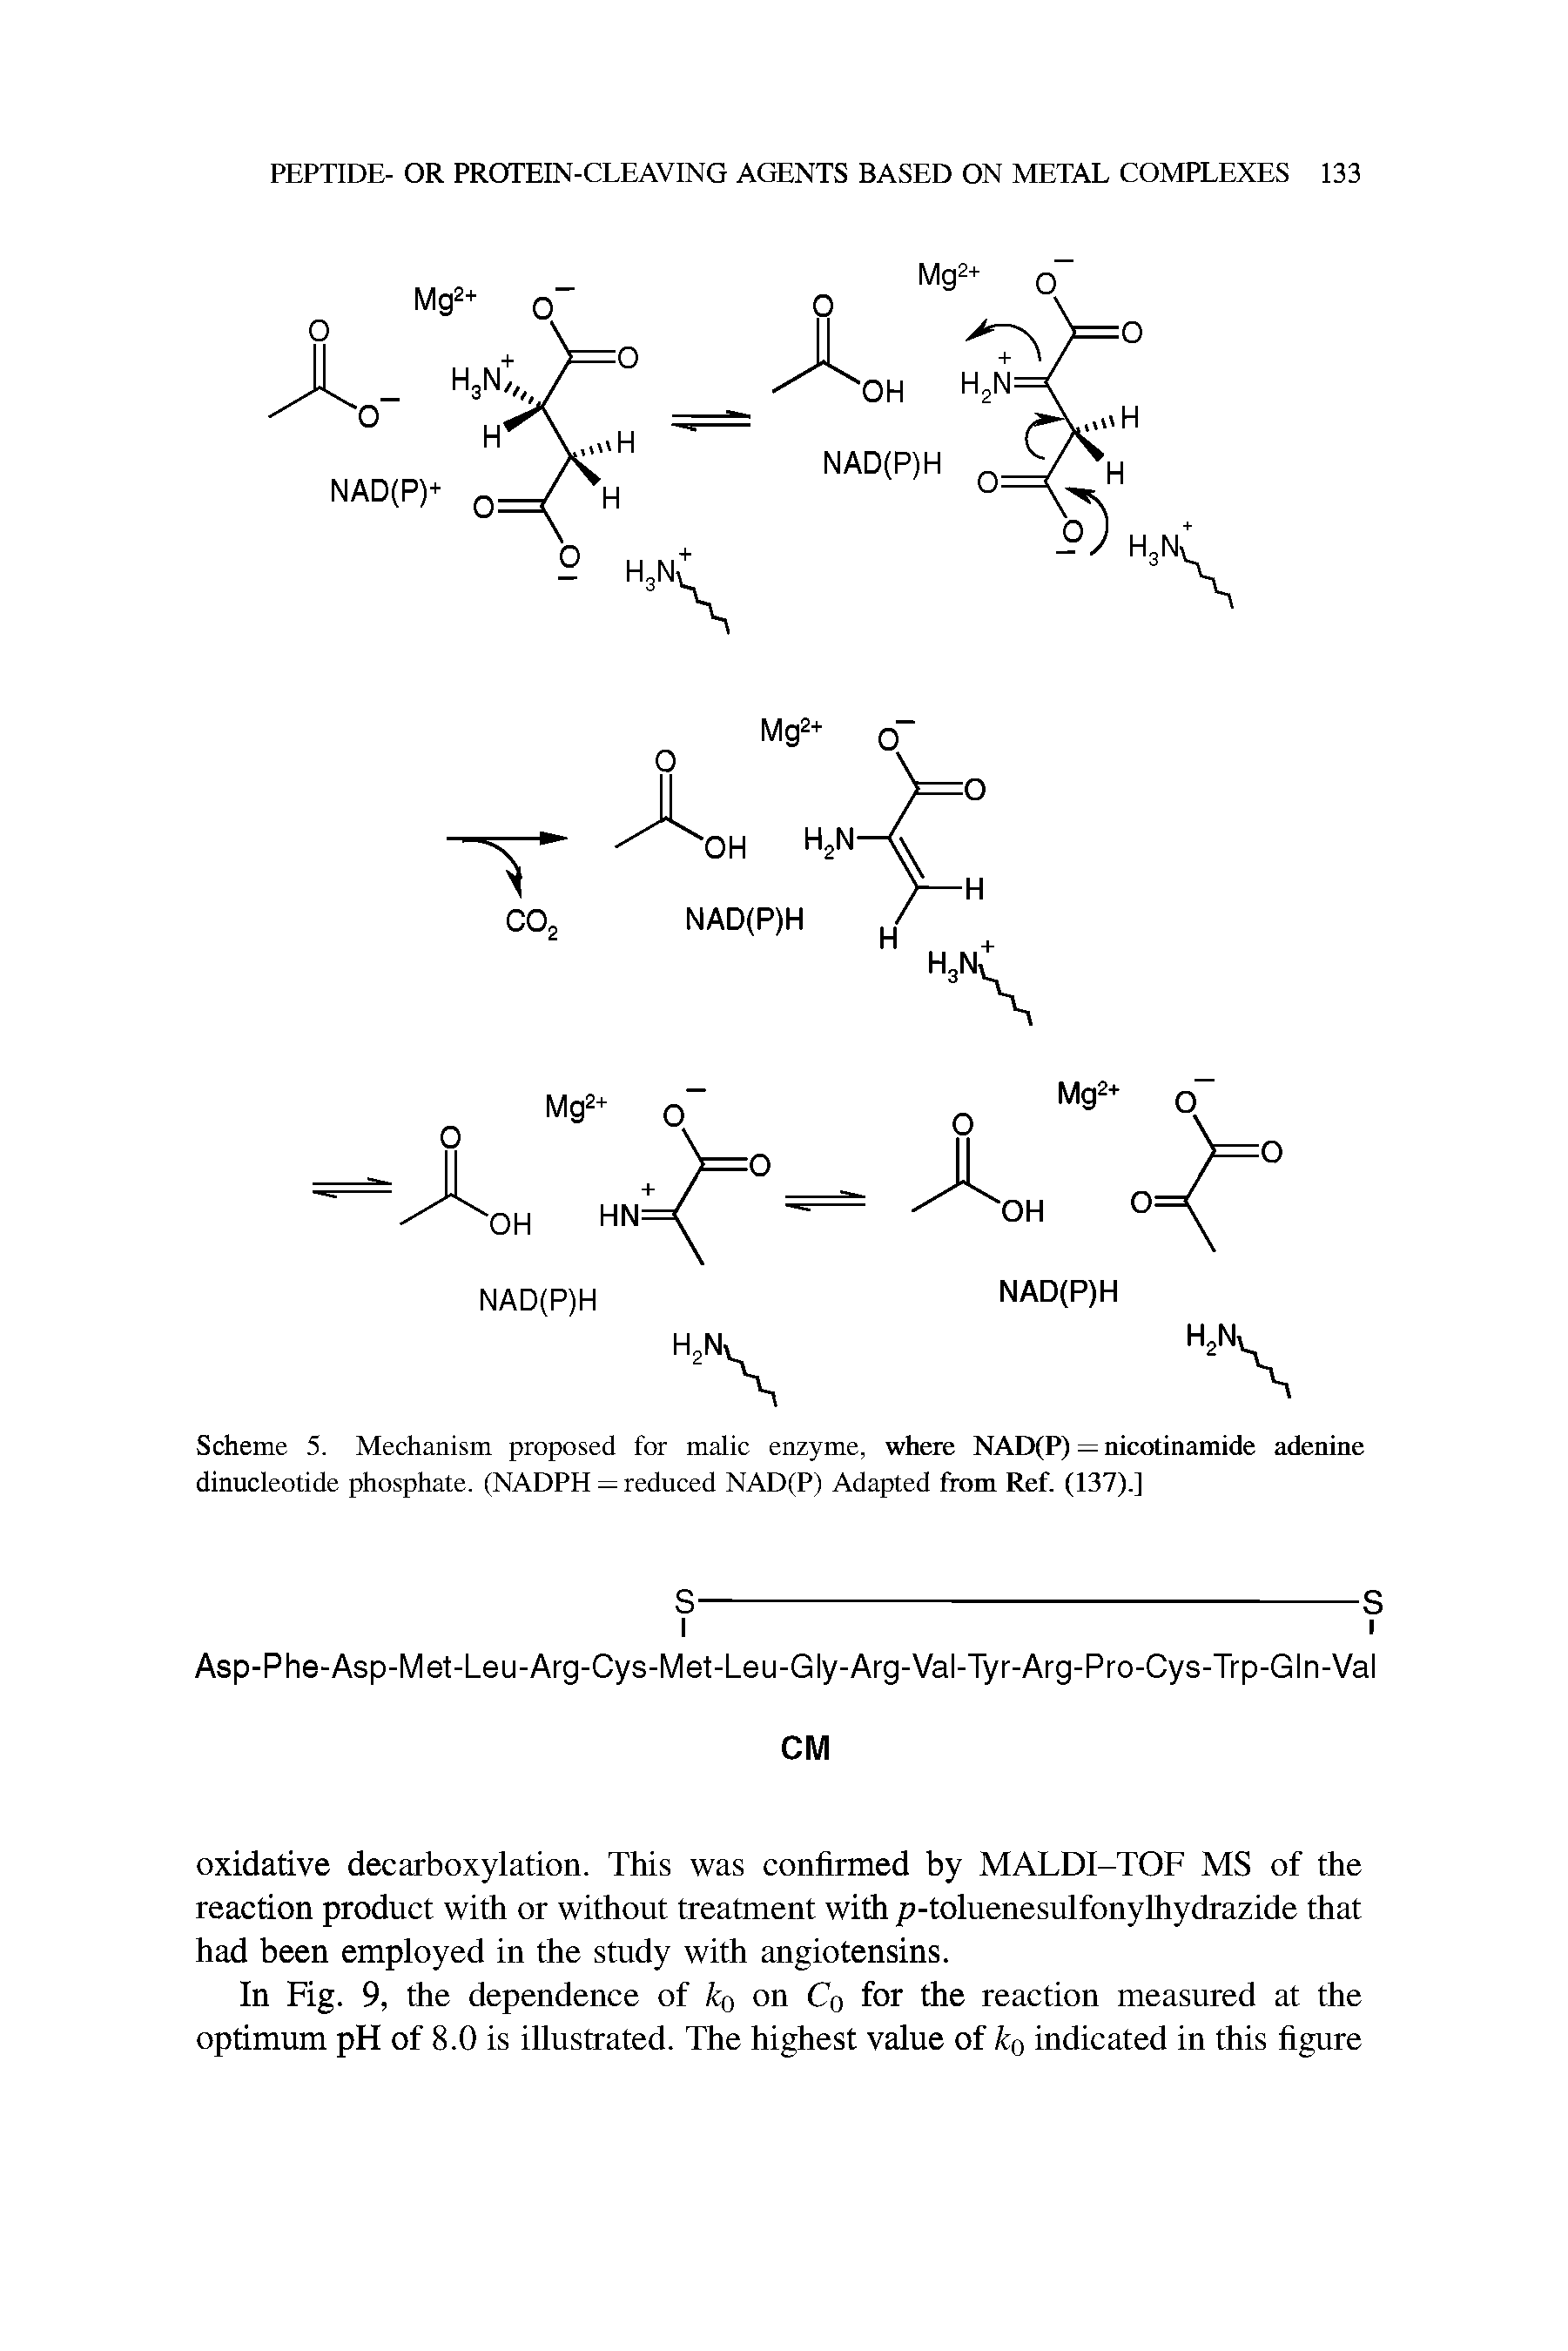 Scheme 5. Mechanism proposed for malic enzyme, where NAD(P) = nicotinamide adenine dinucleotide phosphate. (NADPH = reduced NAD(P) Adapted from Ref. (137).]...